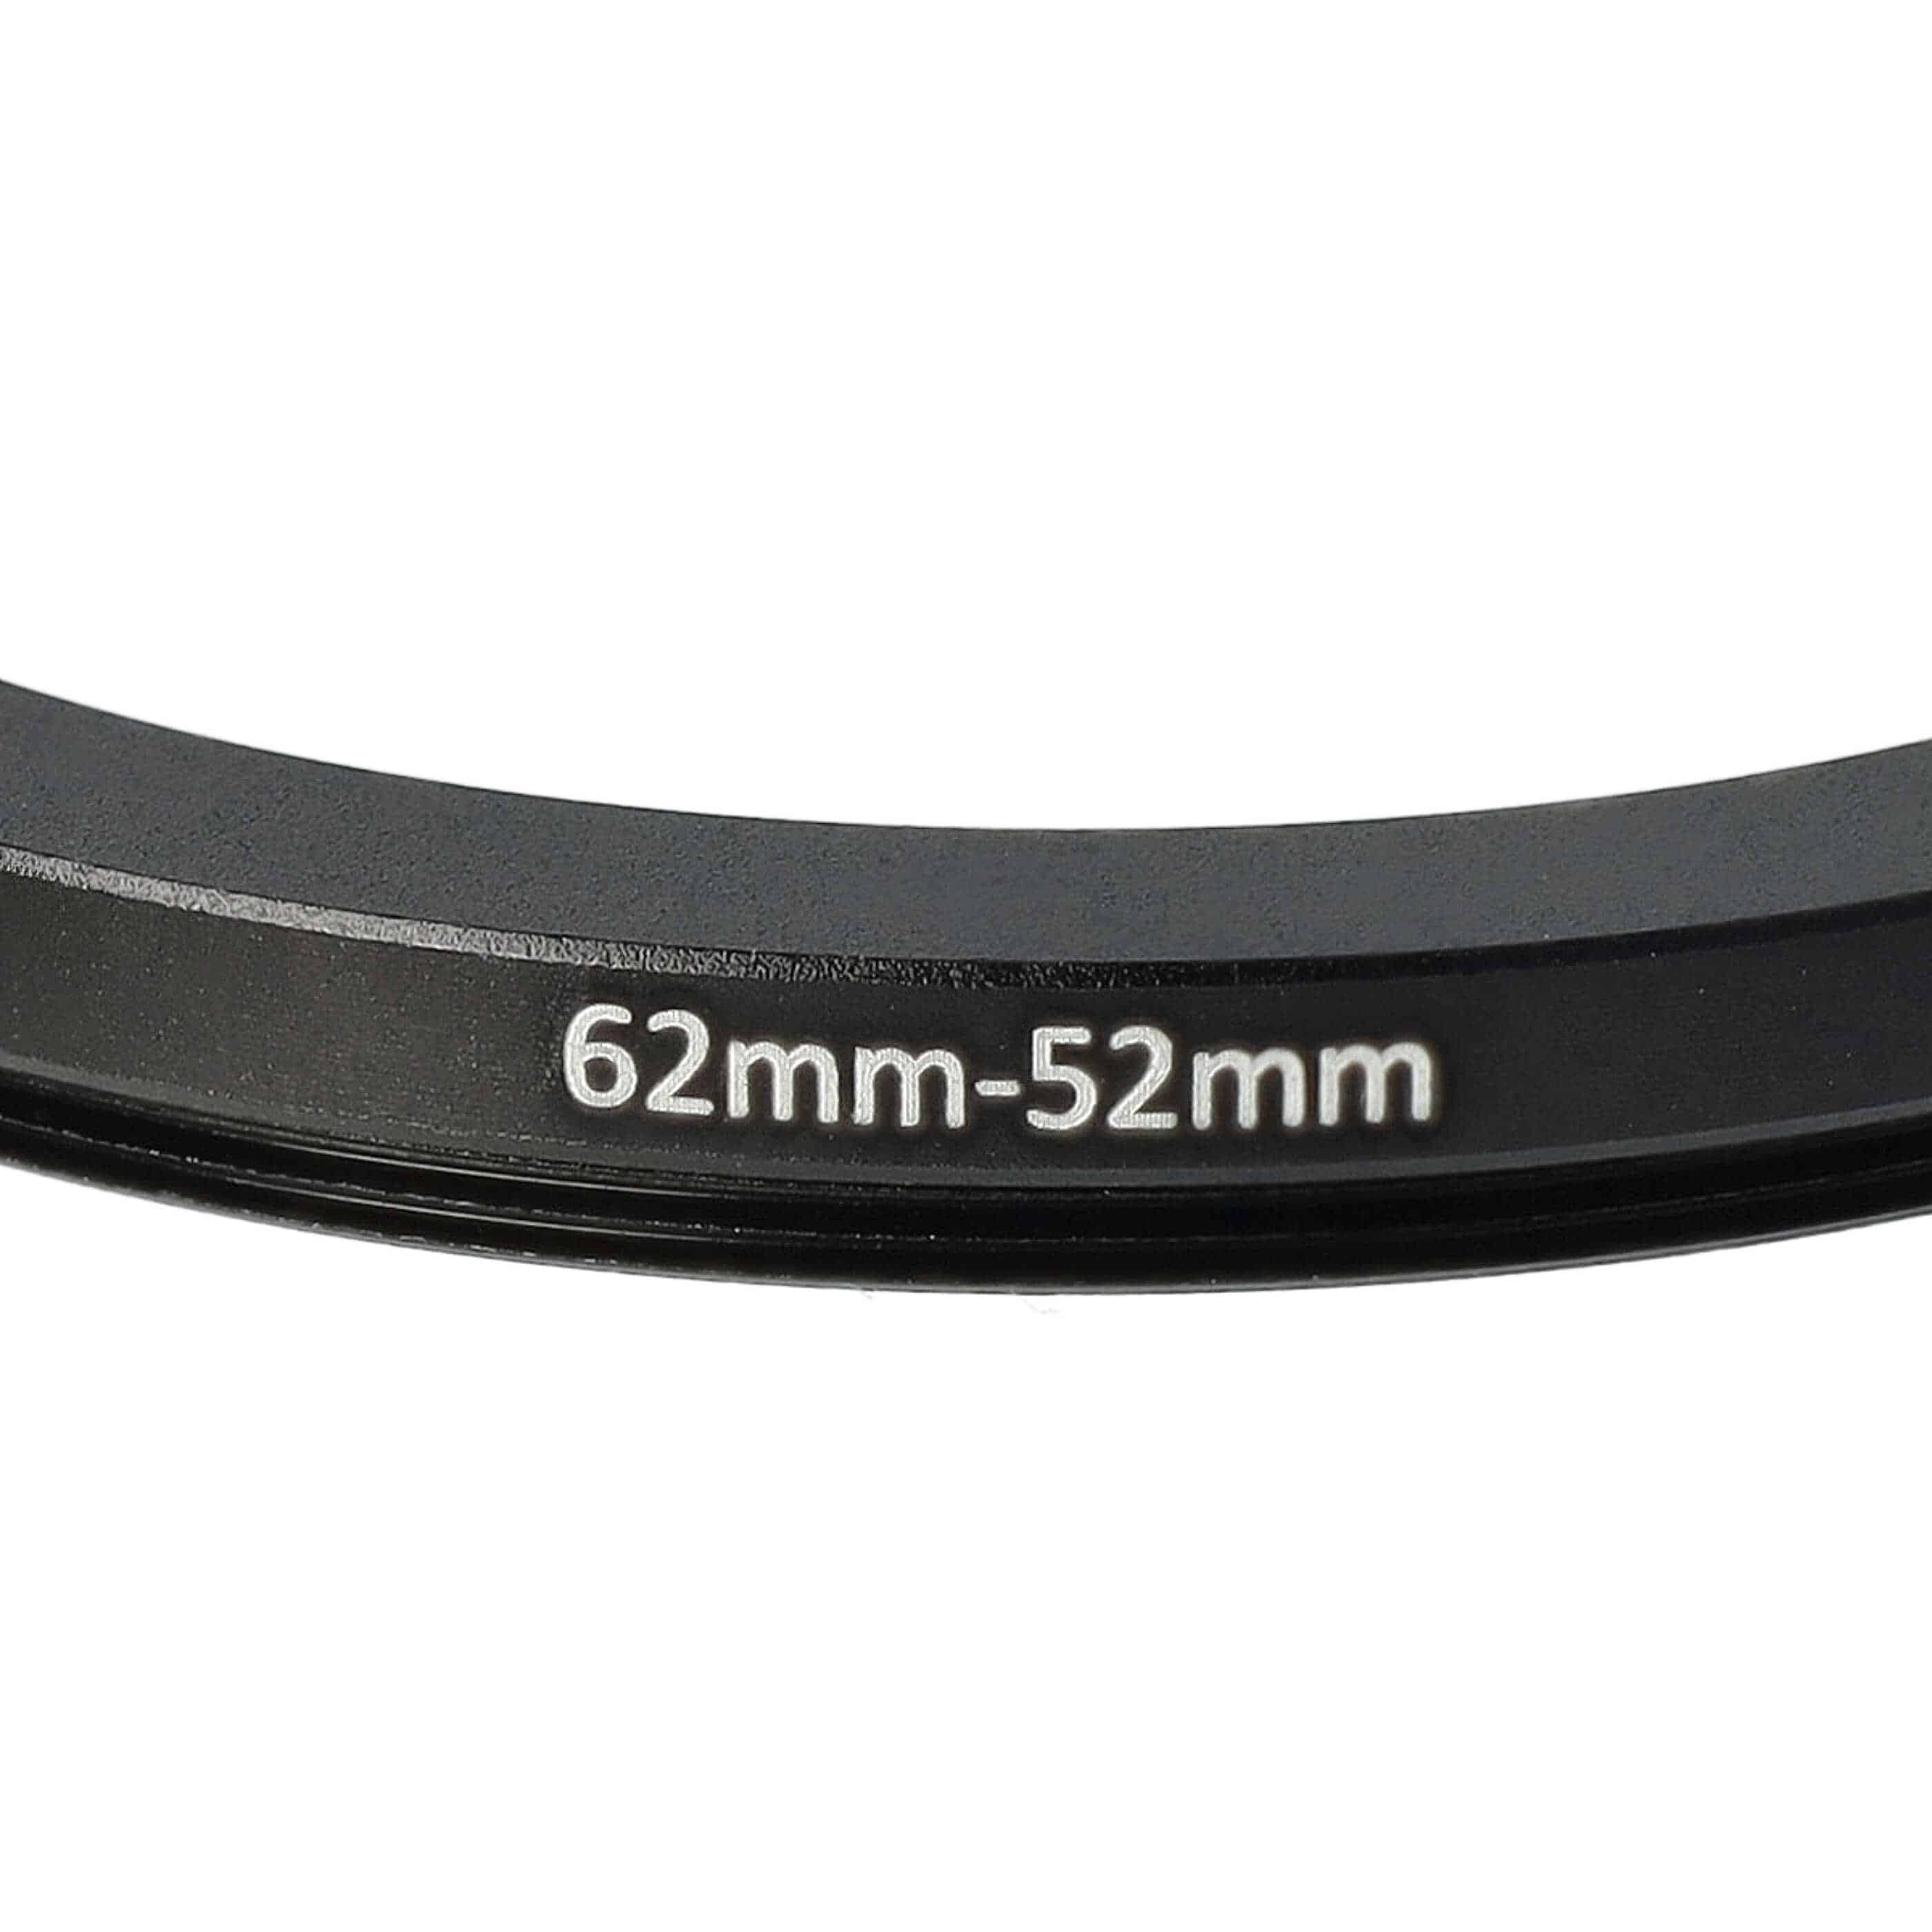 Step-Down Ring Adapter from 62 mm to 52 mm suitable for Camera Lens - Filter Adapter, metal